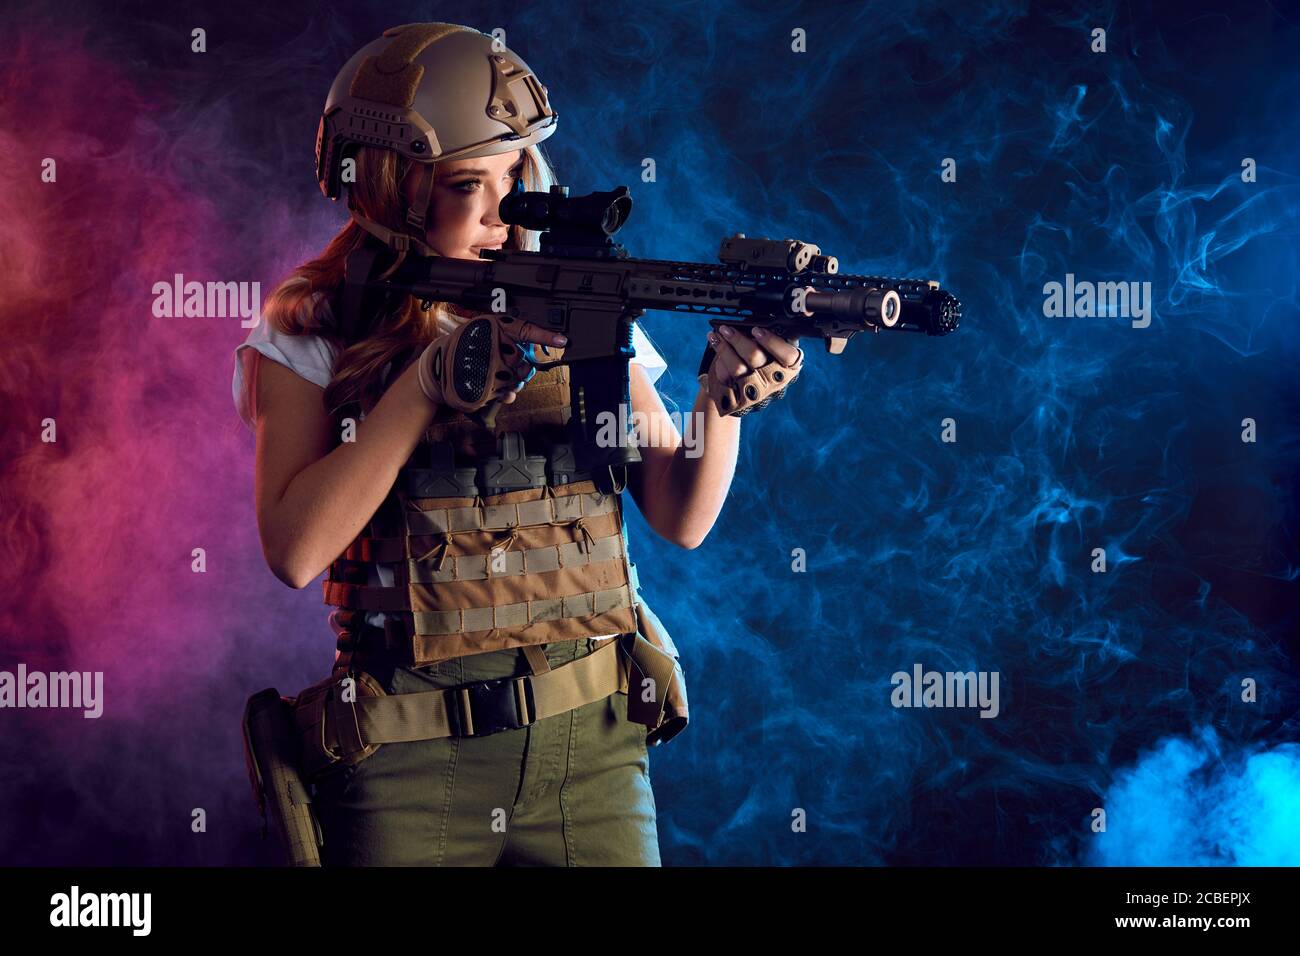 woman sniper in body armour with SVD sniper rifle. Female serving in Army, soldier with machine gun. Shot in studio. Smoky dark background imitating e Stock Photo